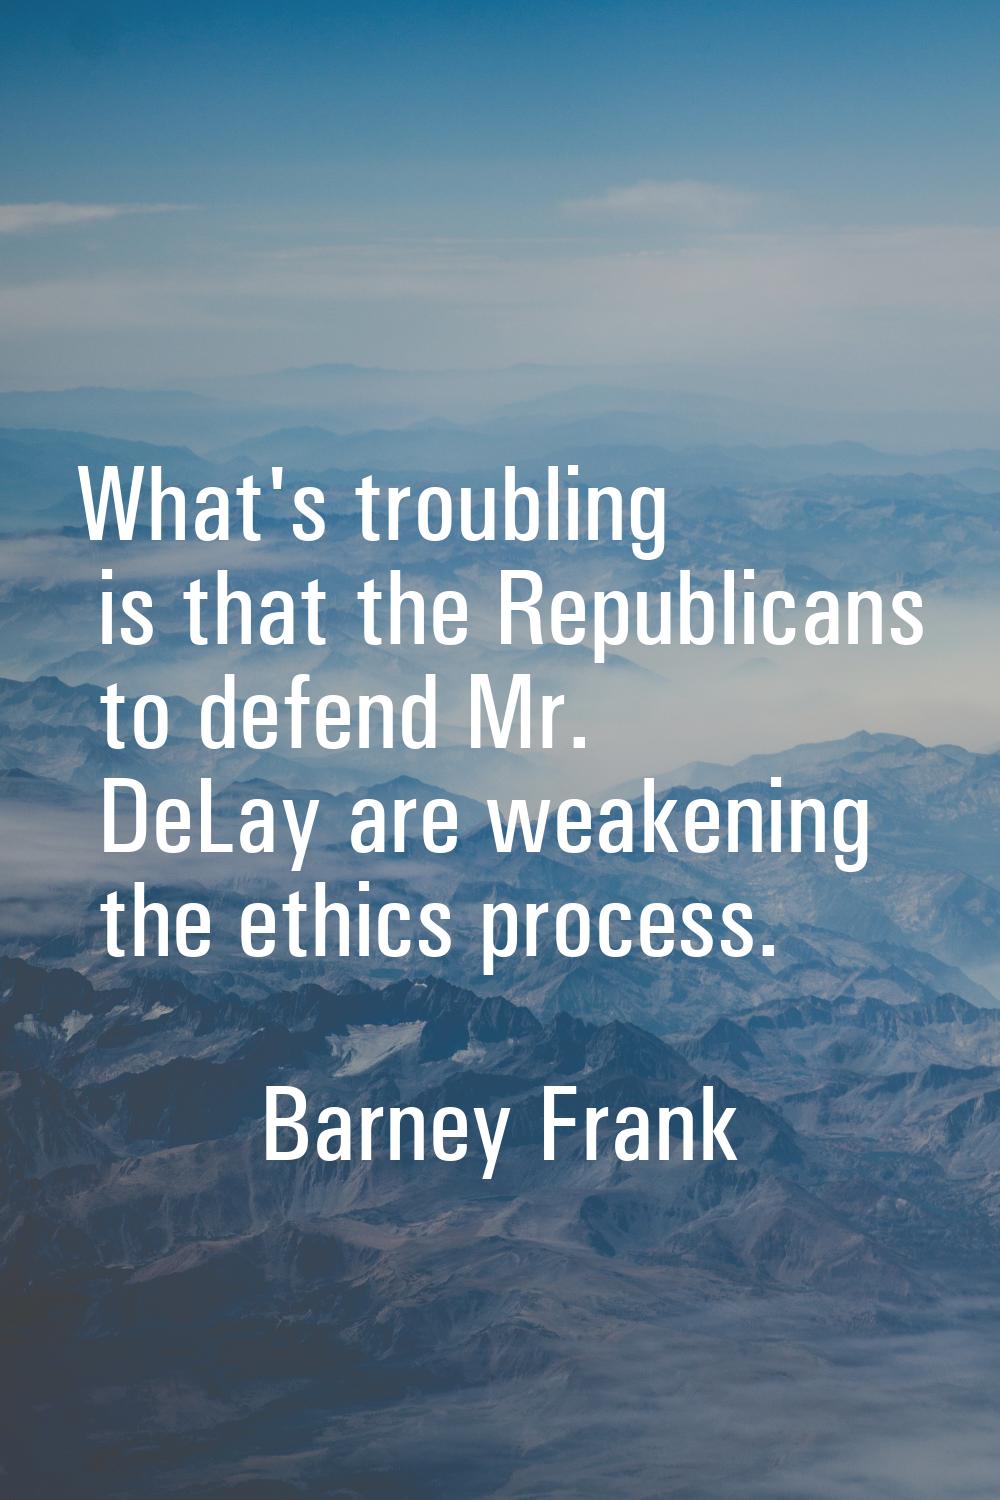 What's troubling is that the Republicans to defend Mr. DeLay are weakening the ethics process.